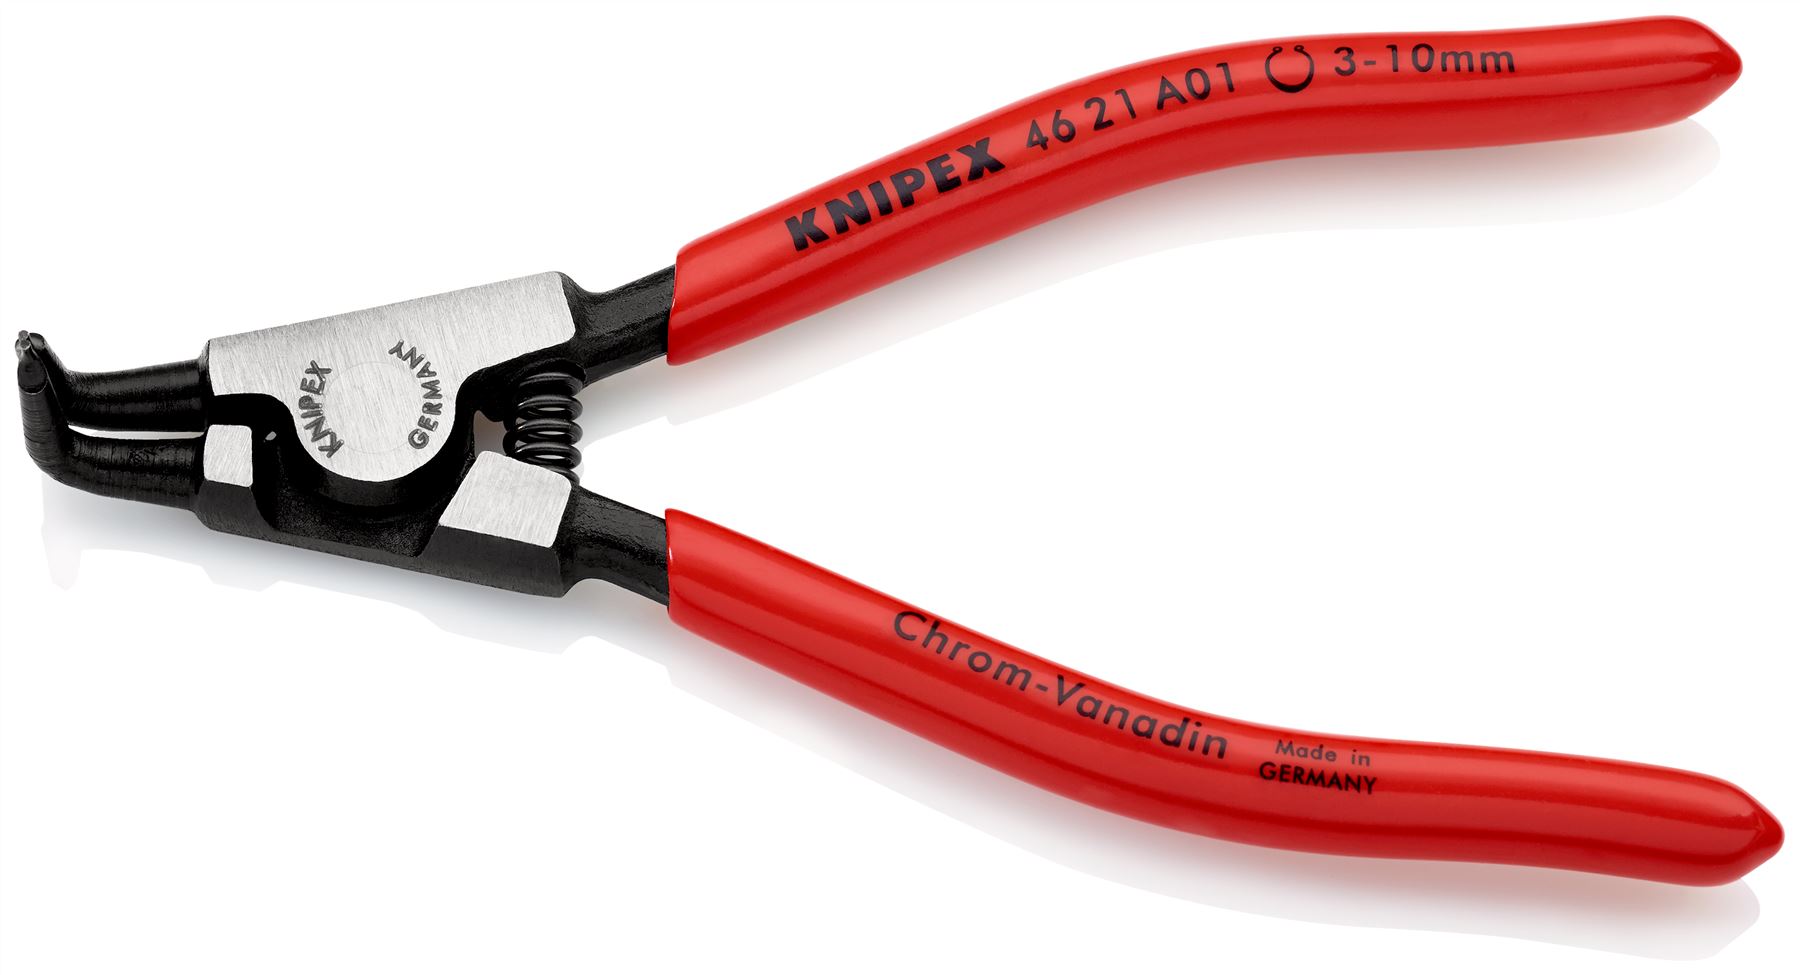 KNIPEX Circlip Pliers for External Circlips on Shafts 90° Angled 125mm 0.9mm Diameter Tips 46 21 A01 SB